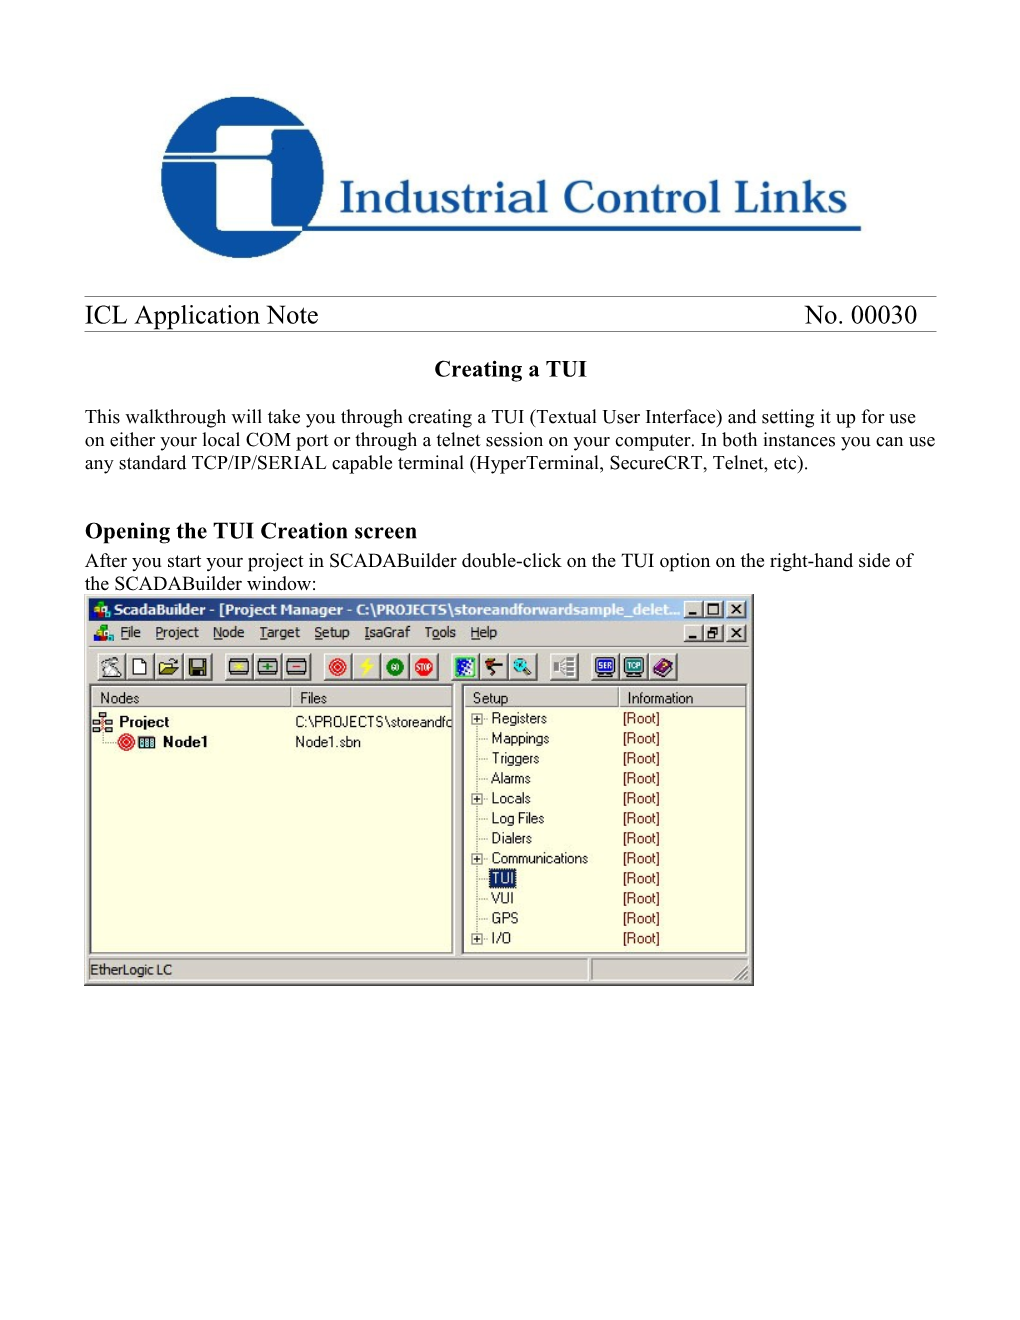 ICL Application Note No. 00030